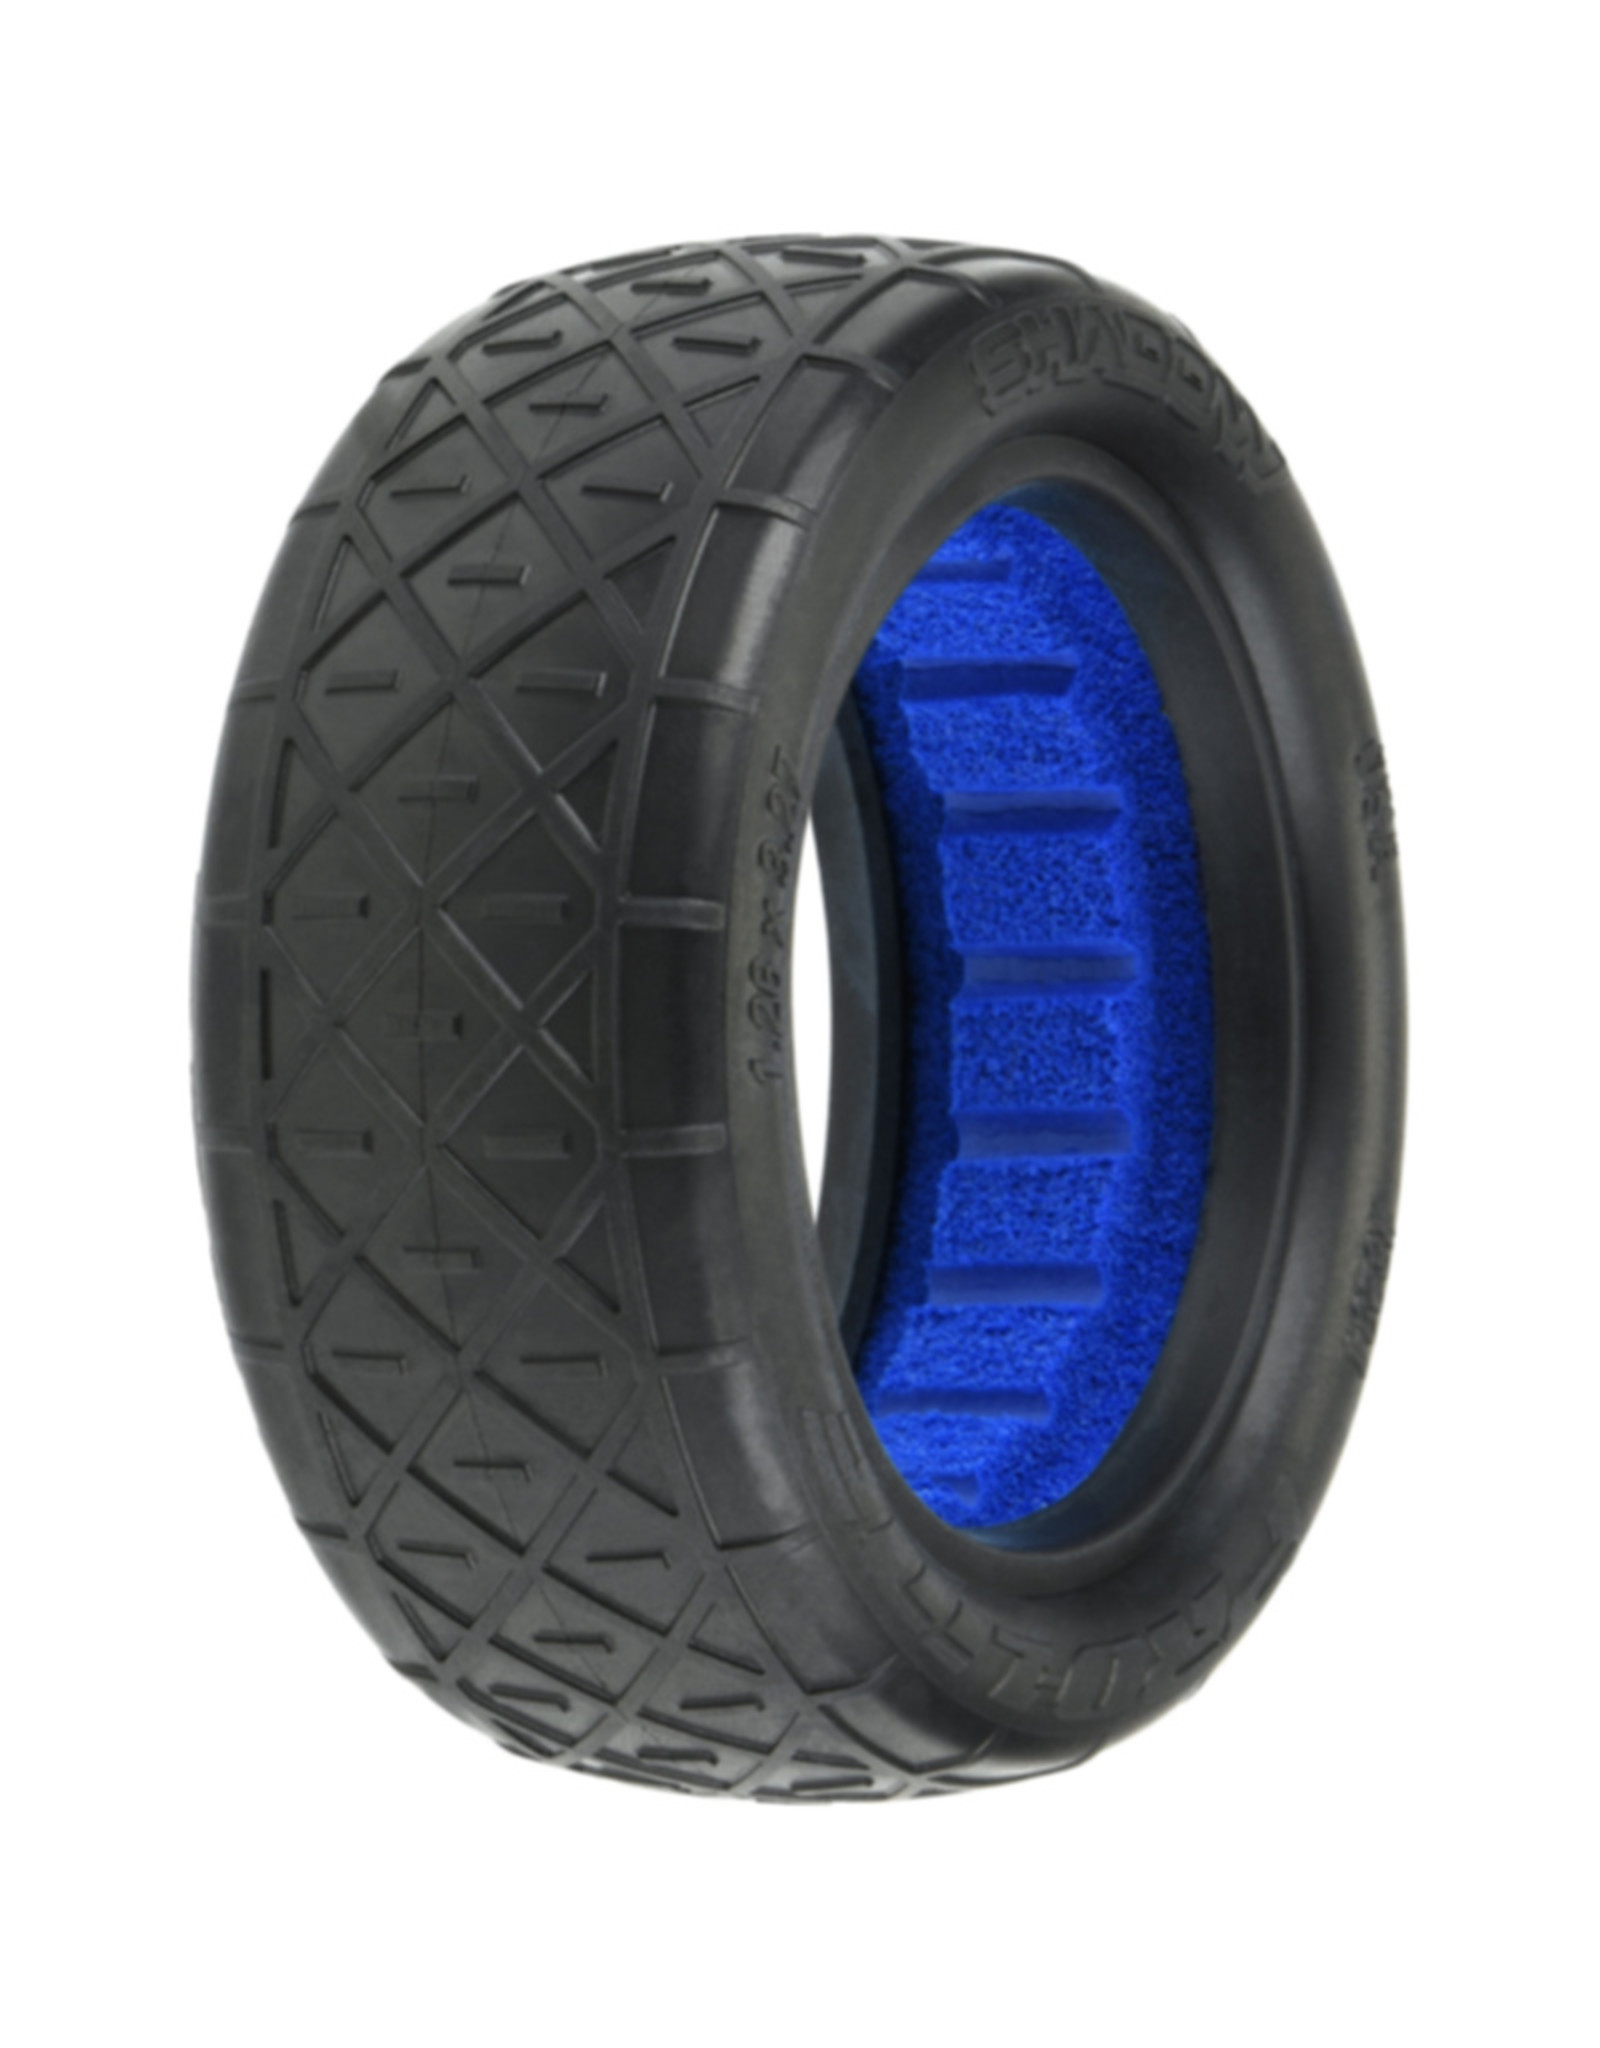 Pro-Line Racing PRO829417 Shadow 2.2" 4WD MC Buggy Front Tires (2)